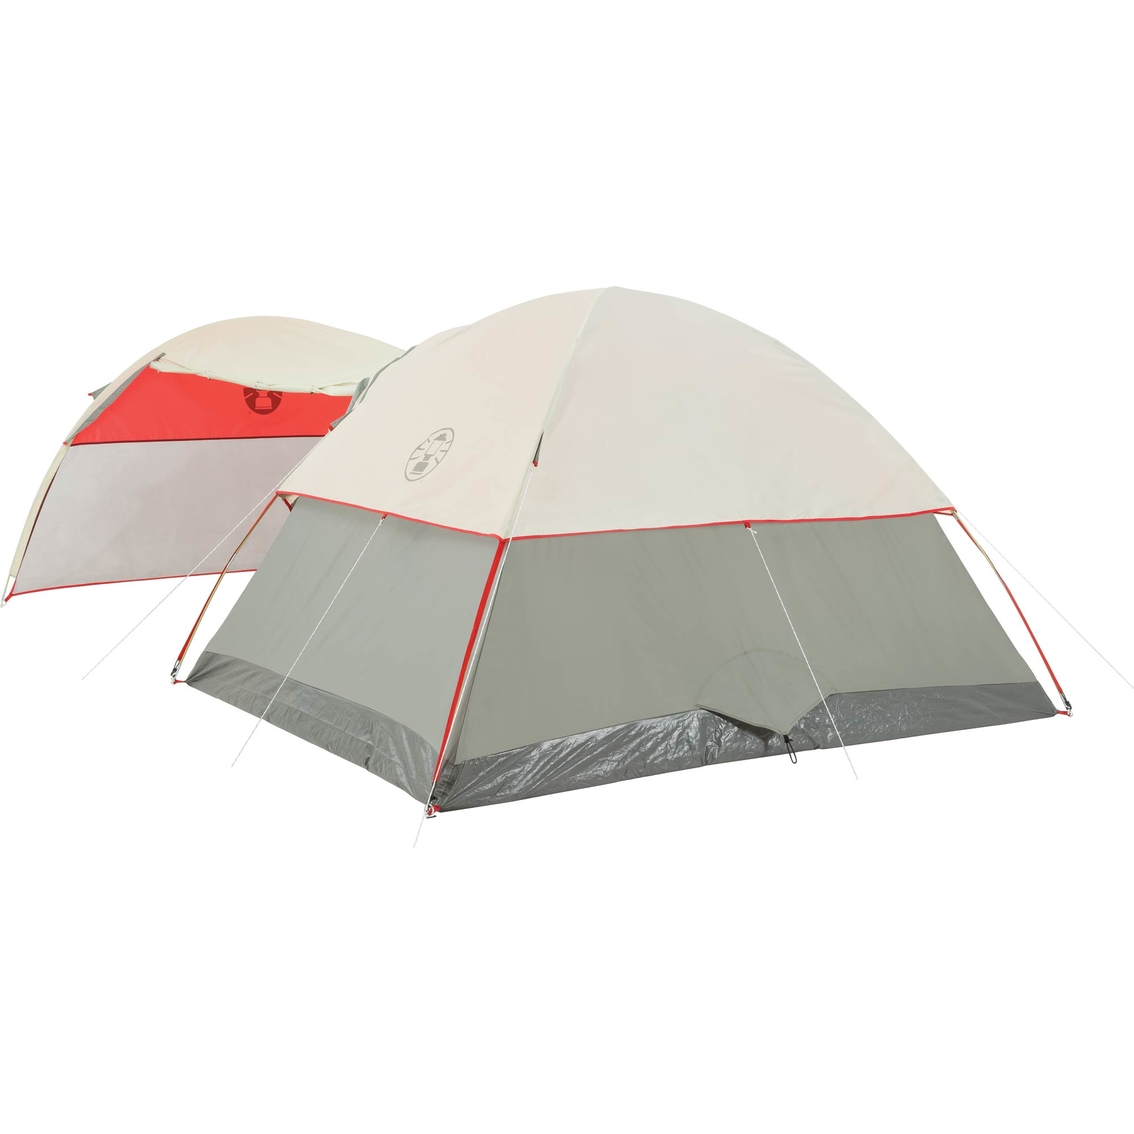 COLEMAN COLD SPRINGS 4P TENT 